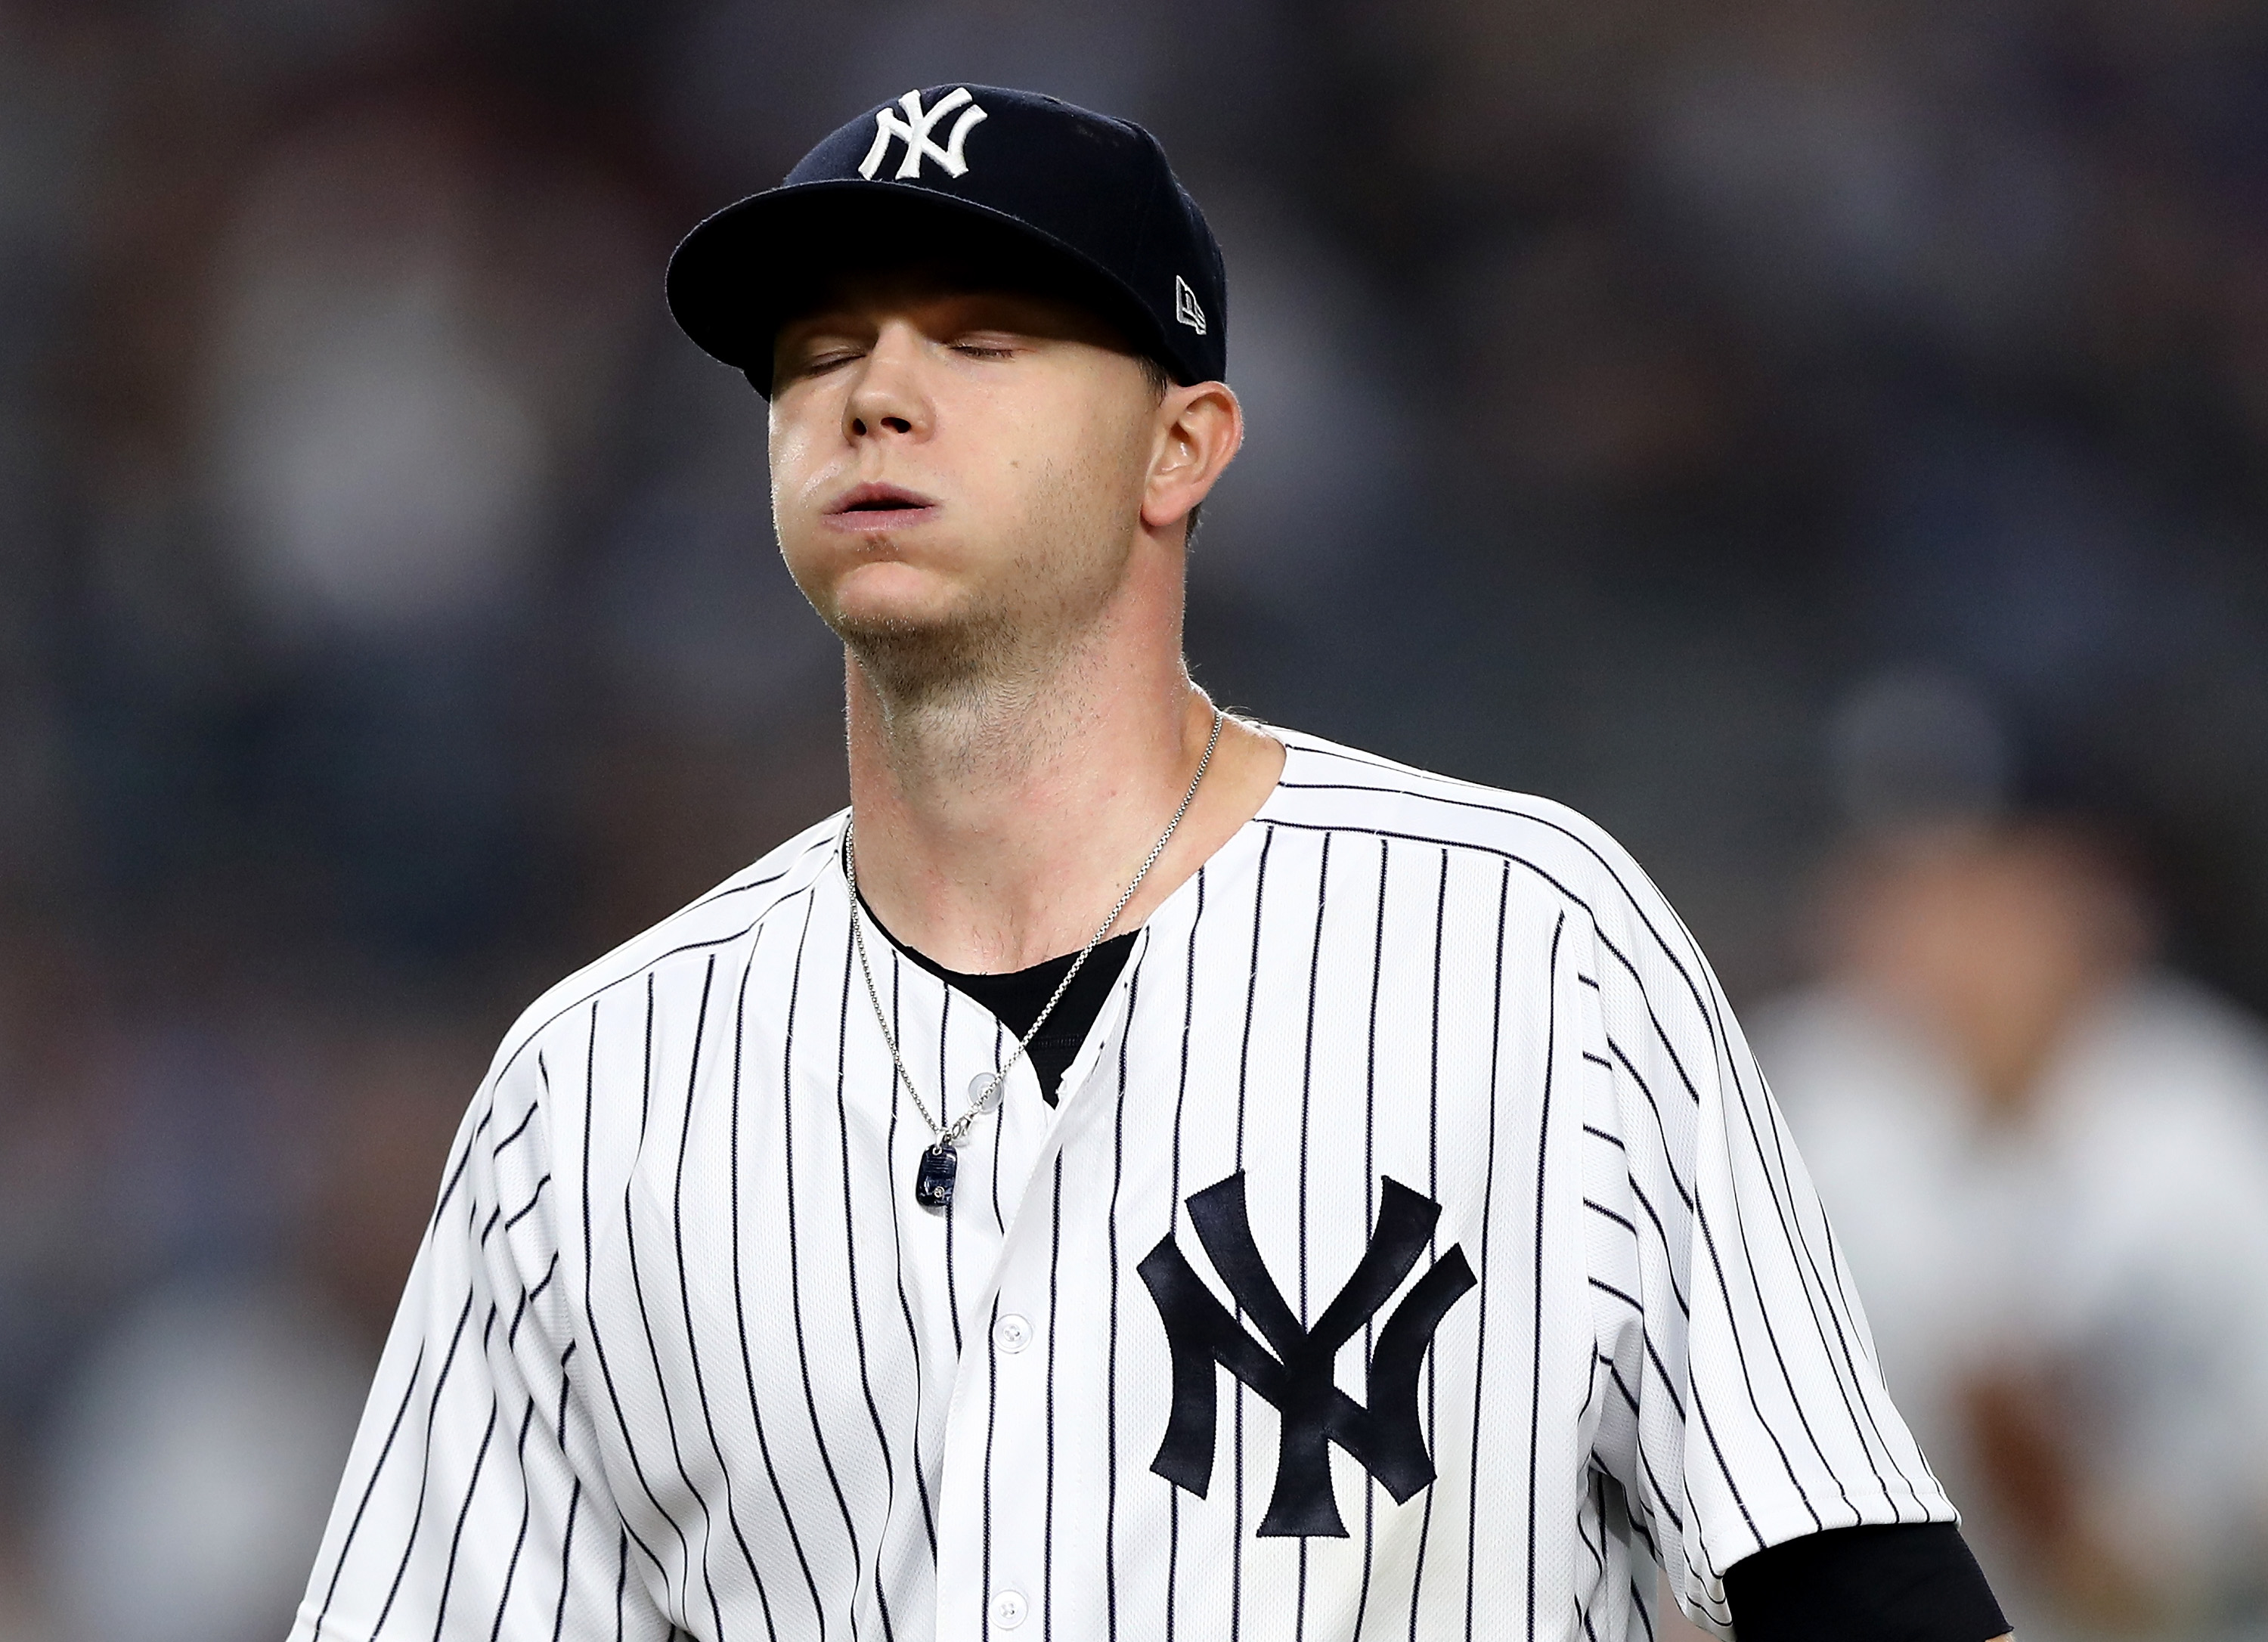 Sonny Gray not discouraged ahead of next New York Yankees start